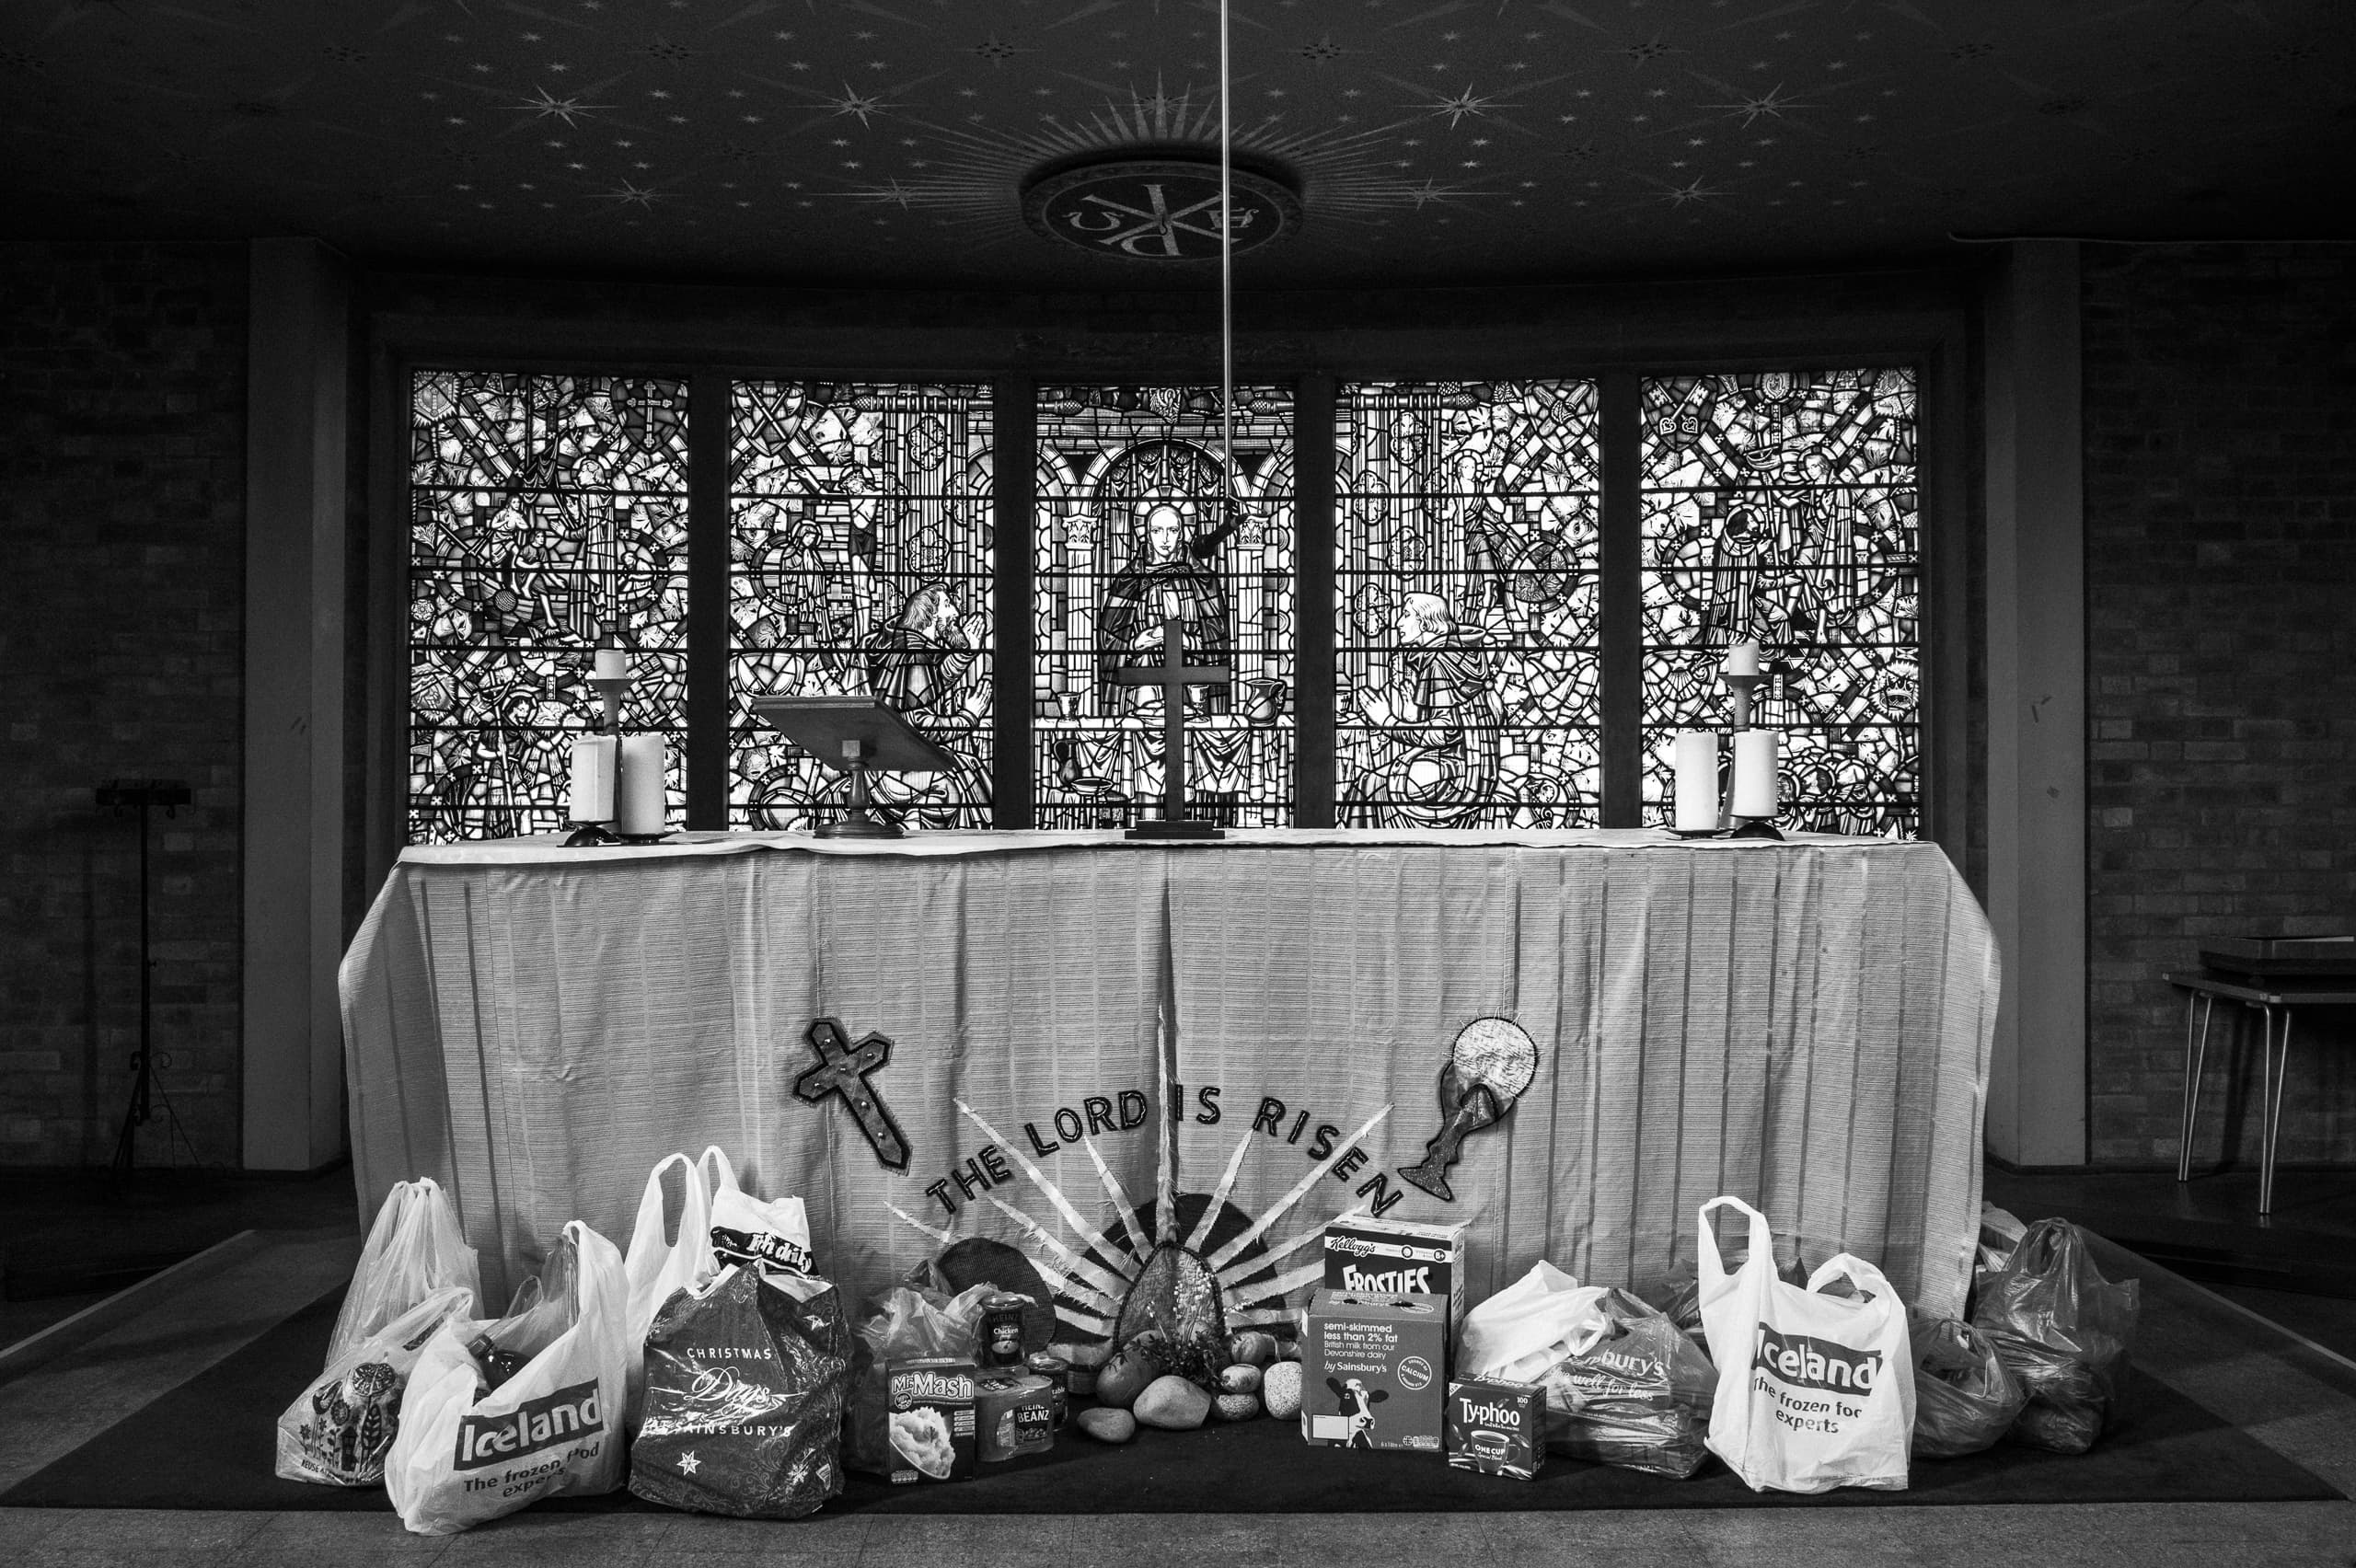 Foodbank collection, courtesy Jim Grover